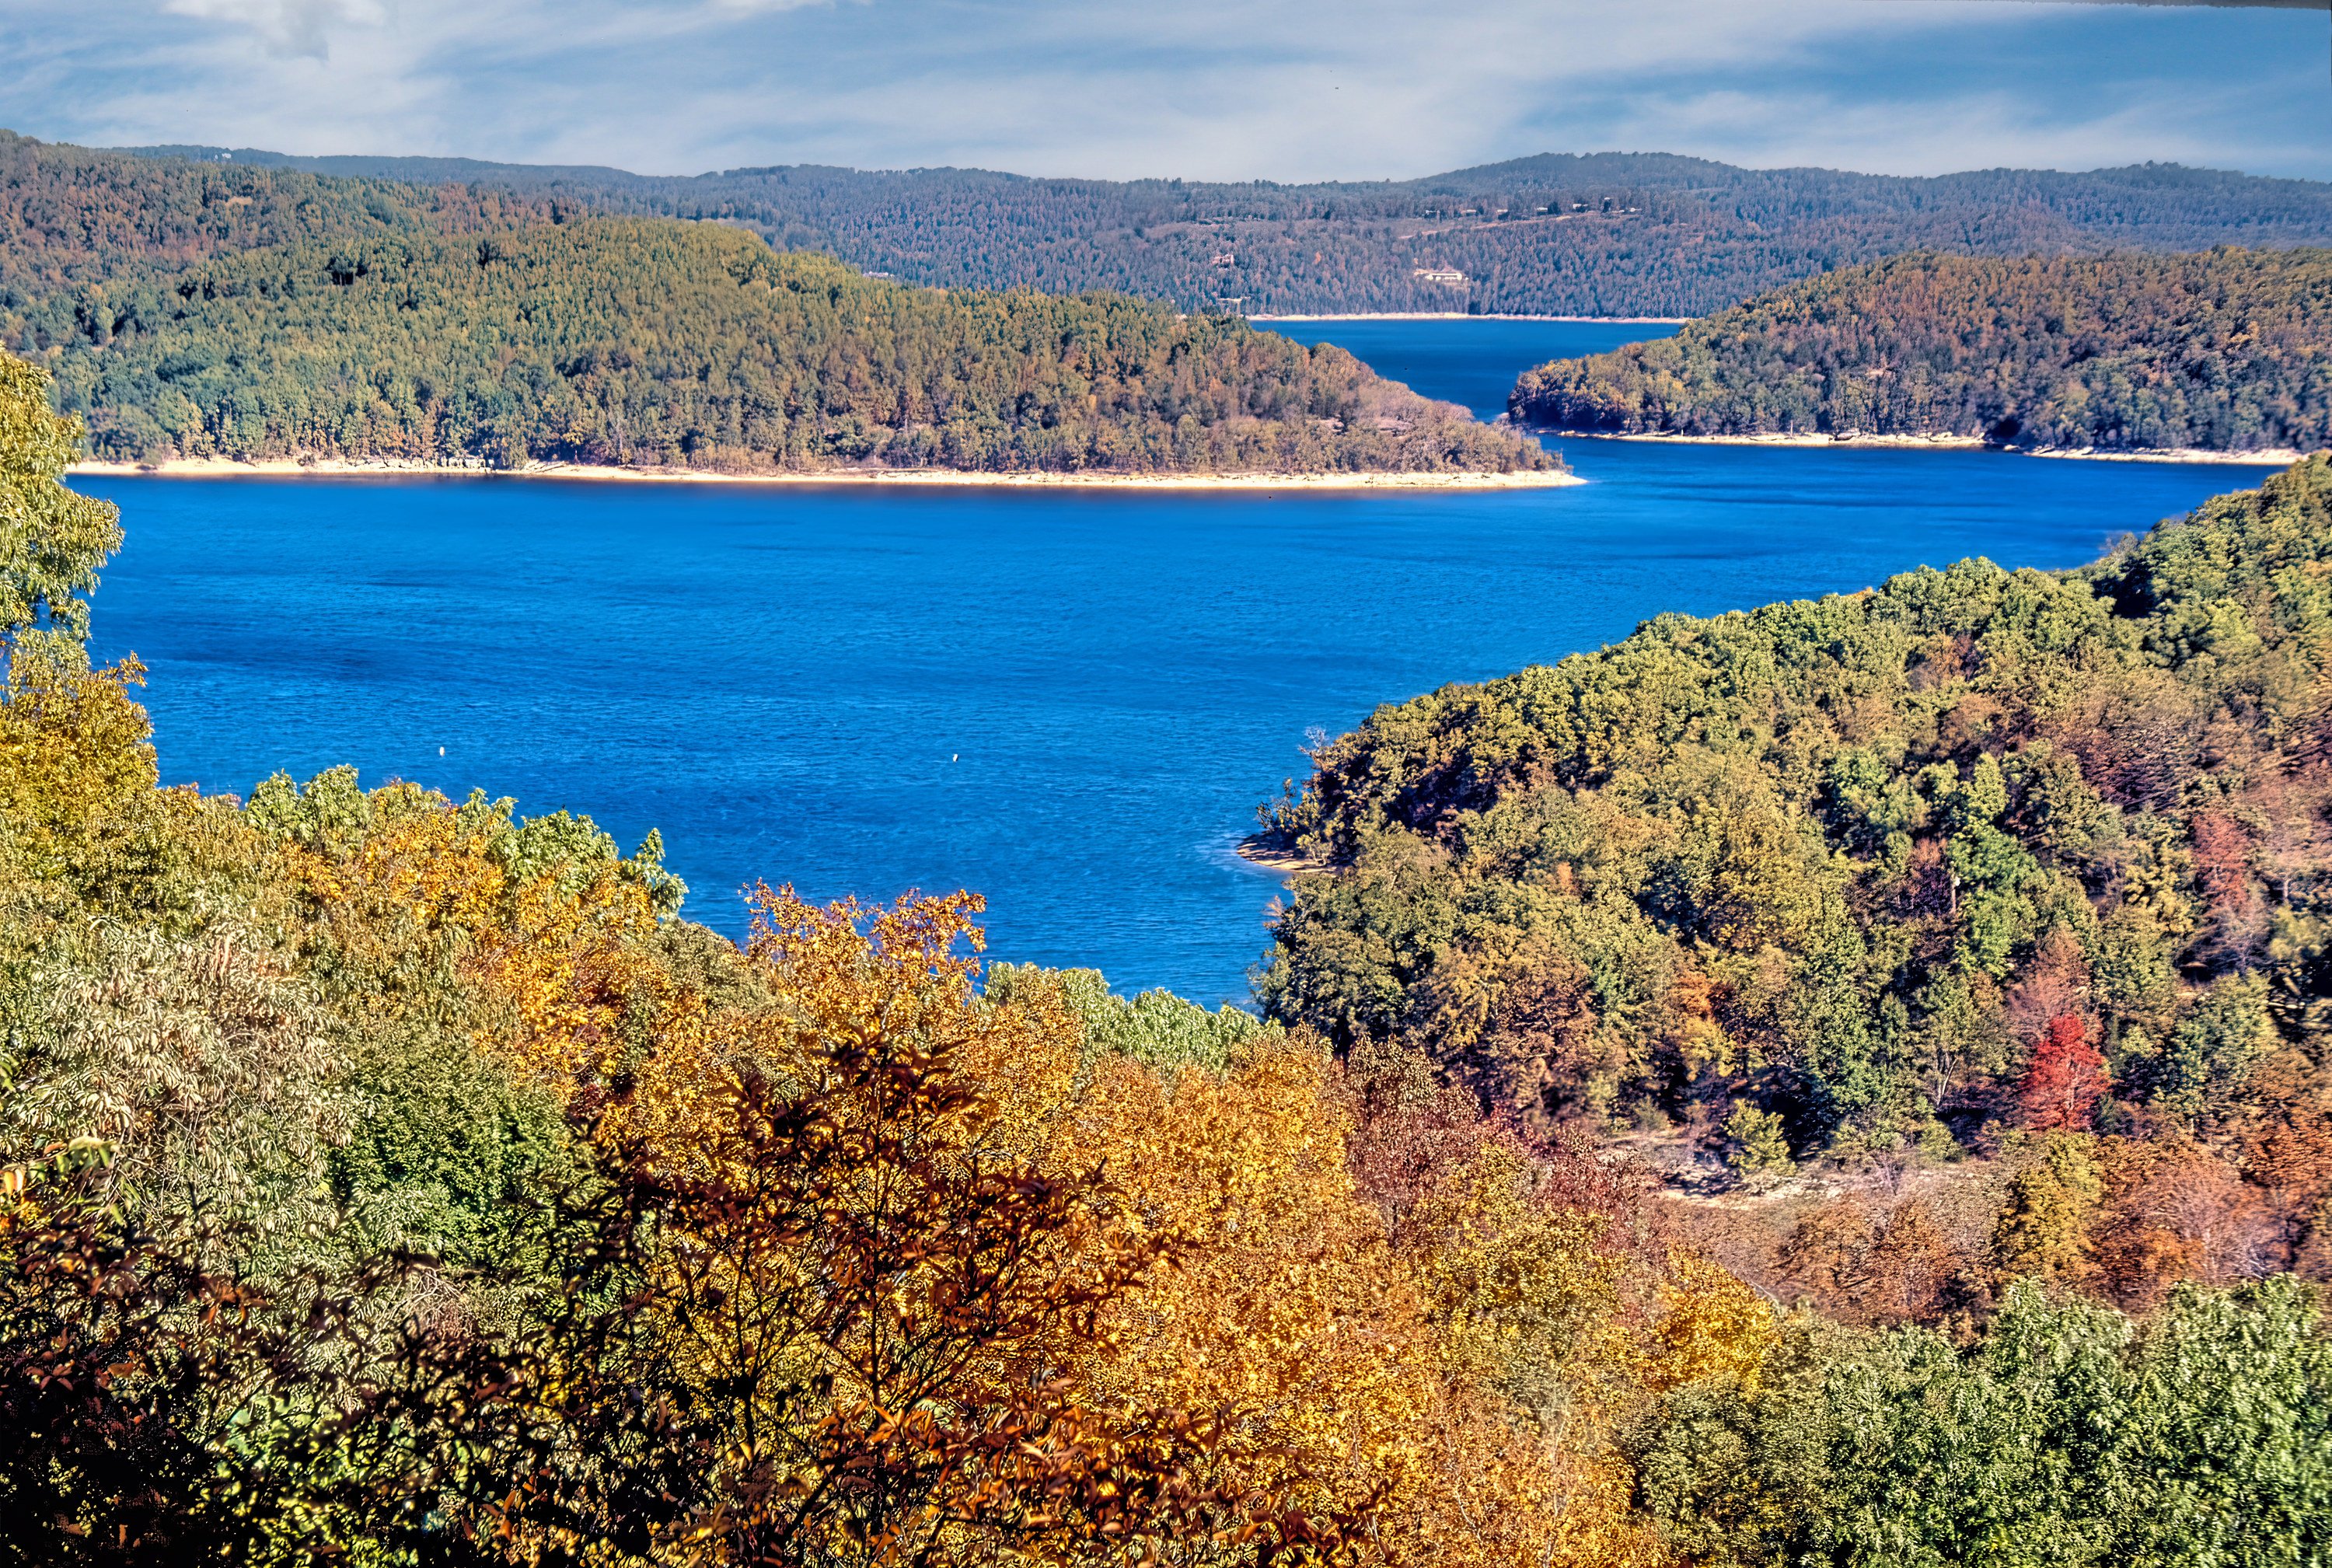 Lake with small islands in the middle, fall foliage on trees